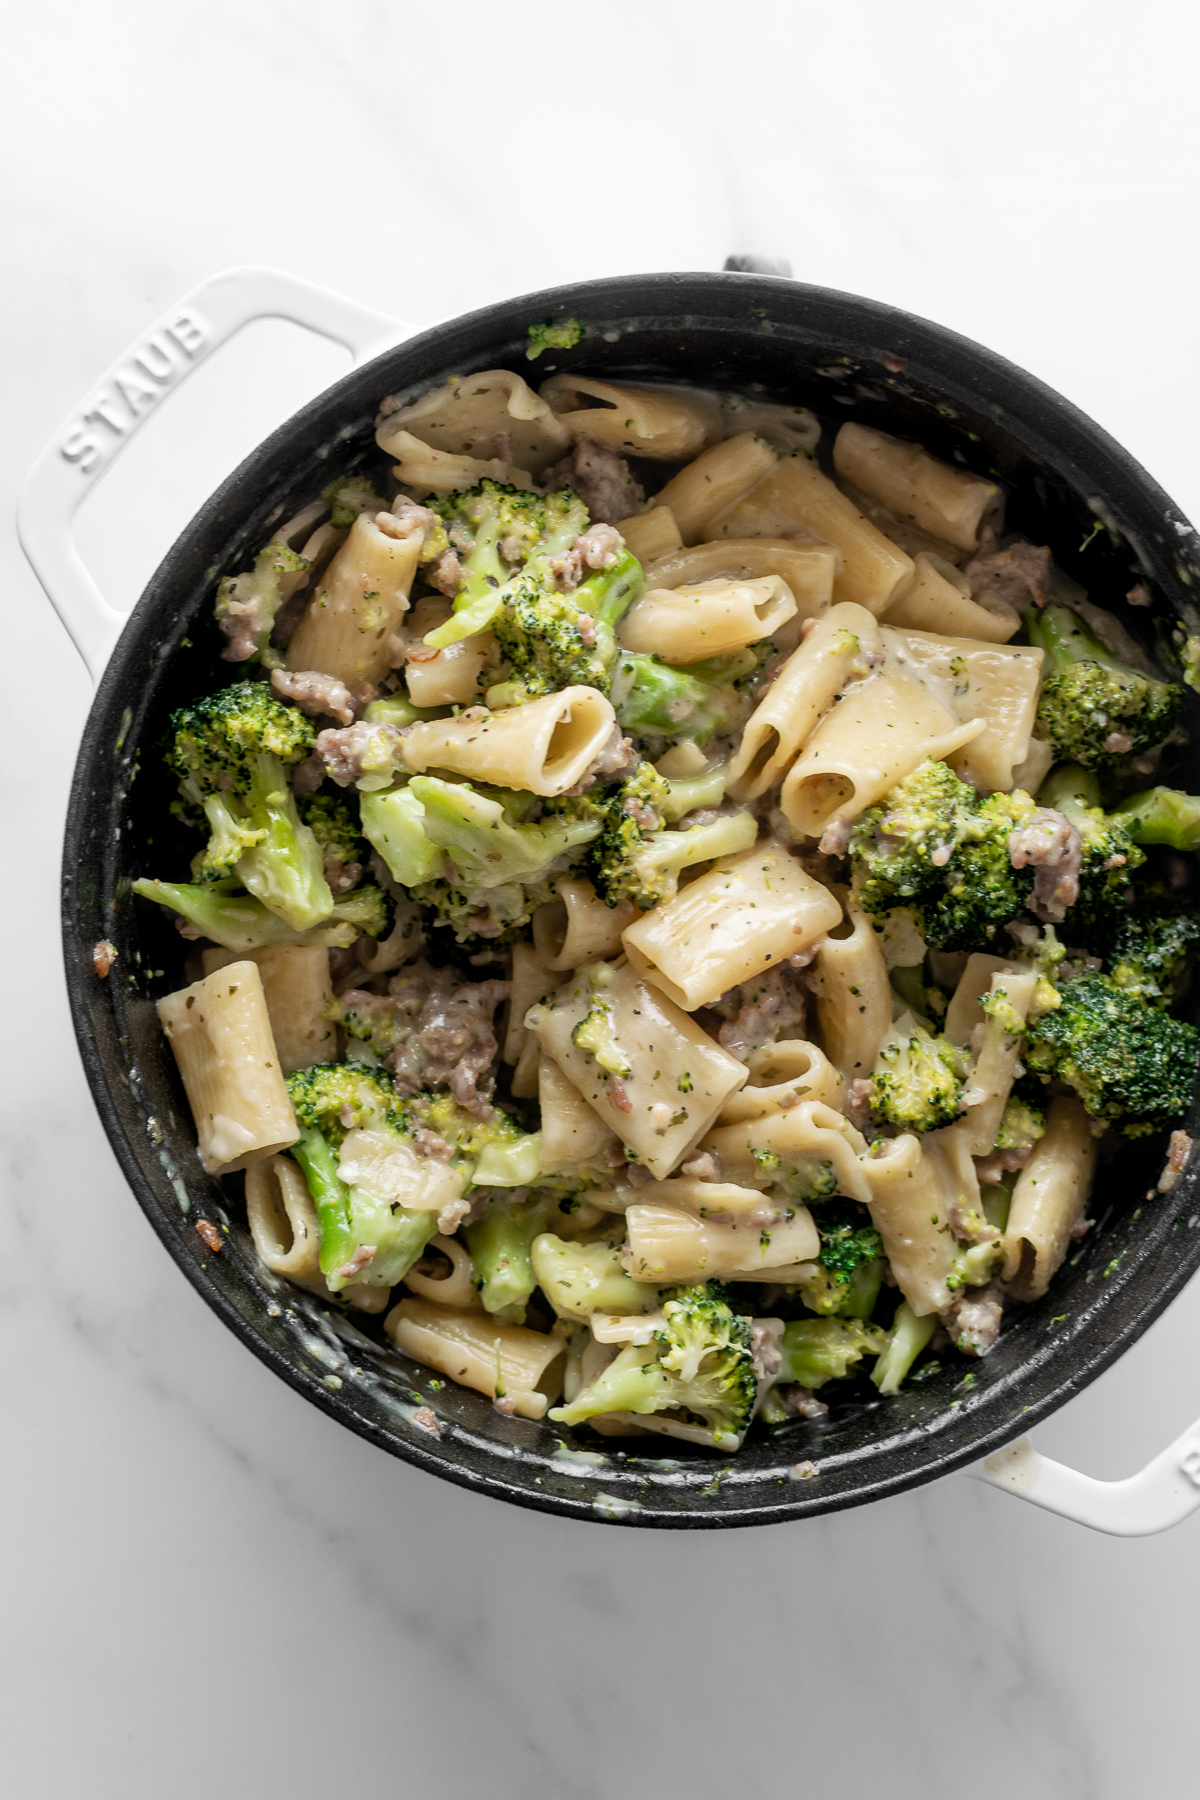 Look no further than this creamy one pot sausage broccoli pasta recipe for your next satisfying weeknight meal. Packed with flavor and convenience, this pasta dish checks all the boxes– minimal effort, easy clean up and done in 30 minutes! This sausage broccoli pasta is everything you want dinner to be and makes great leftovers.